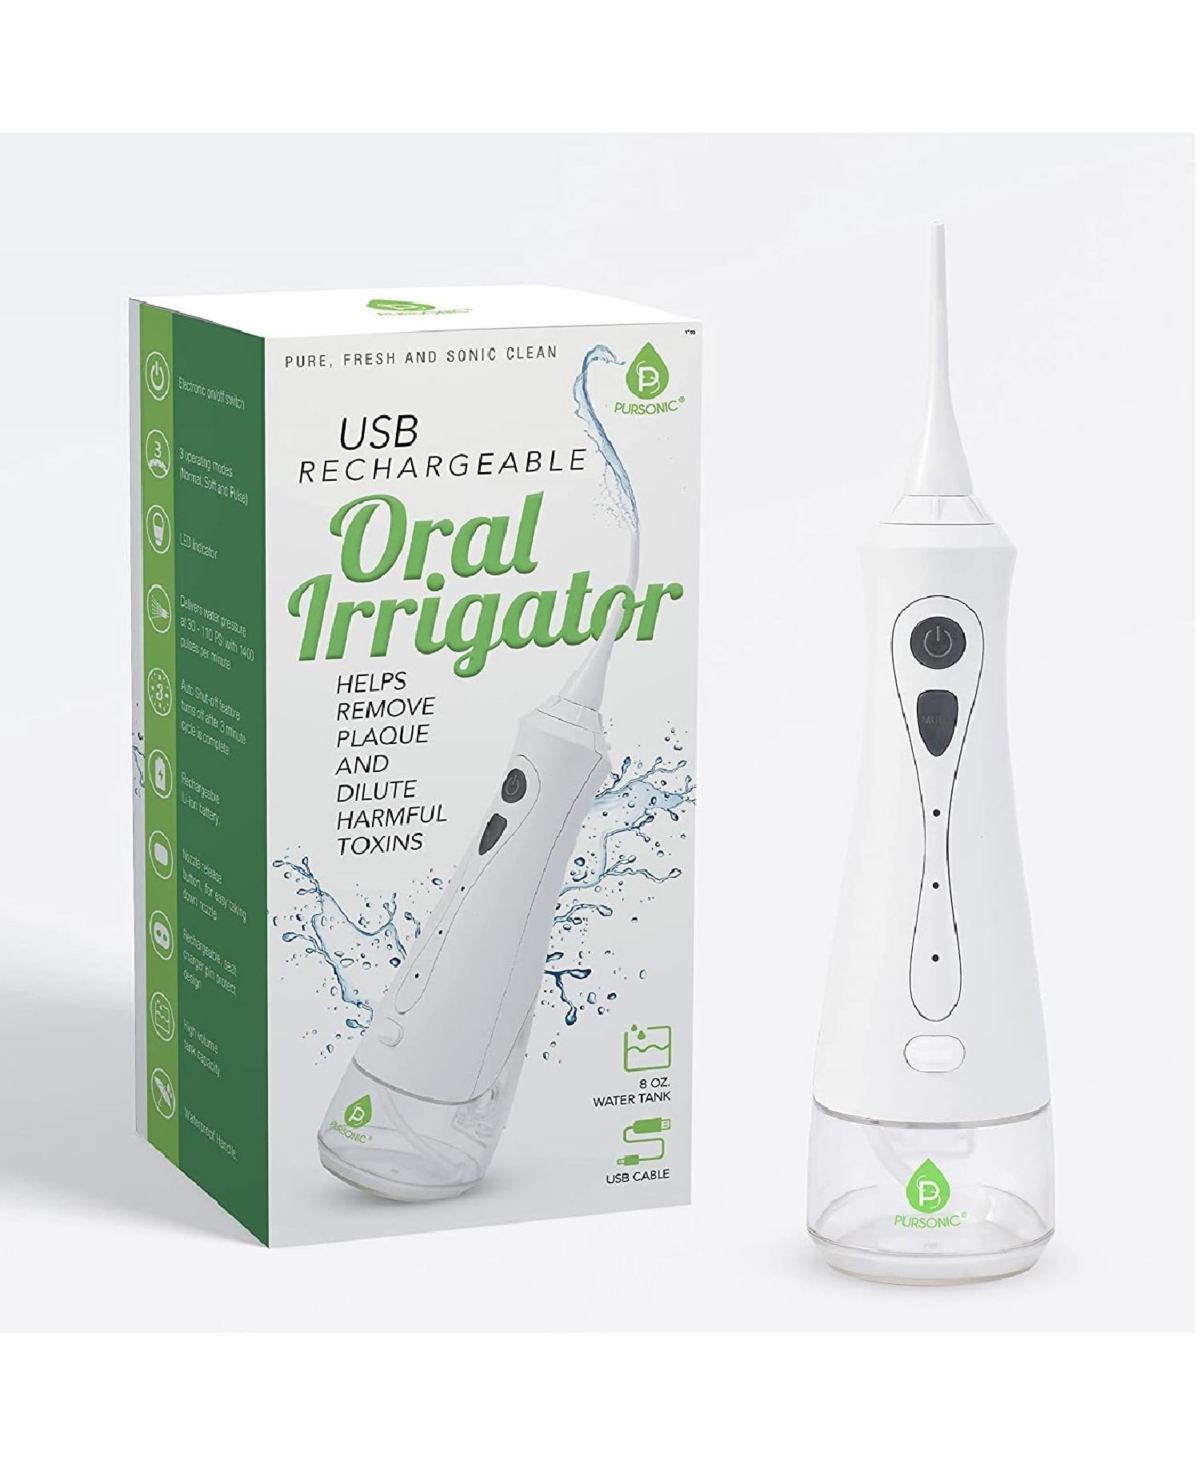 PURSONIC USB RECHARGEABLE ORAL IRRIGATOR